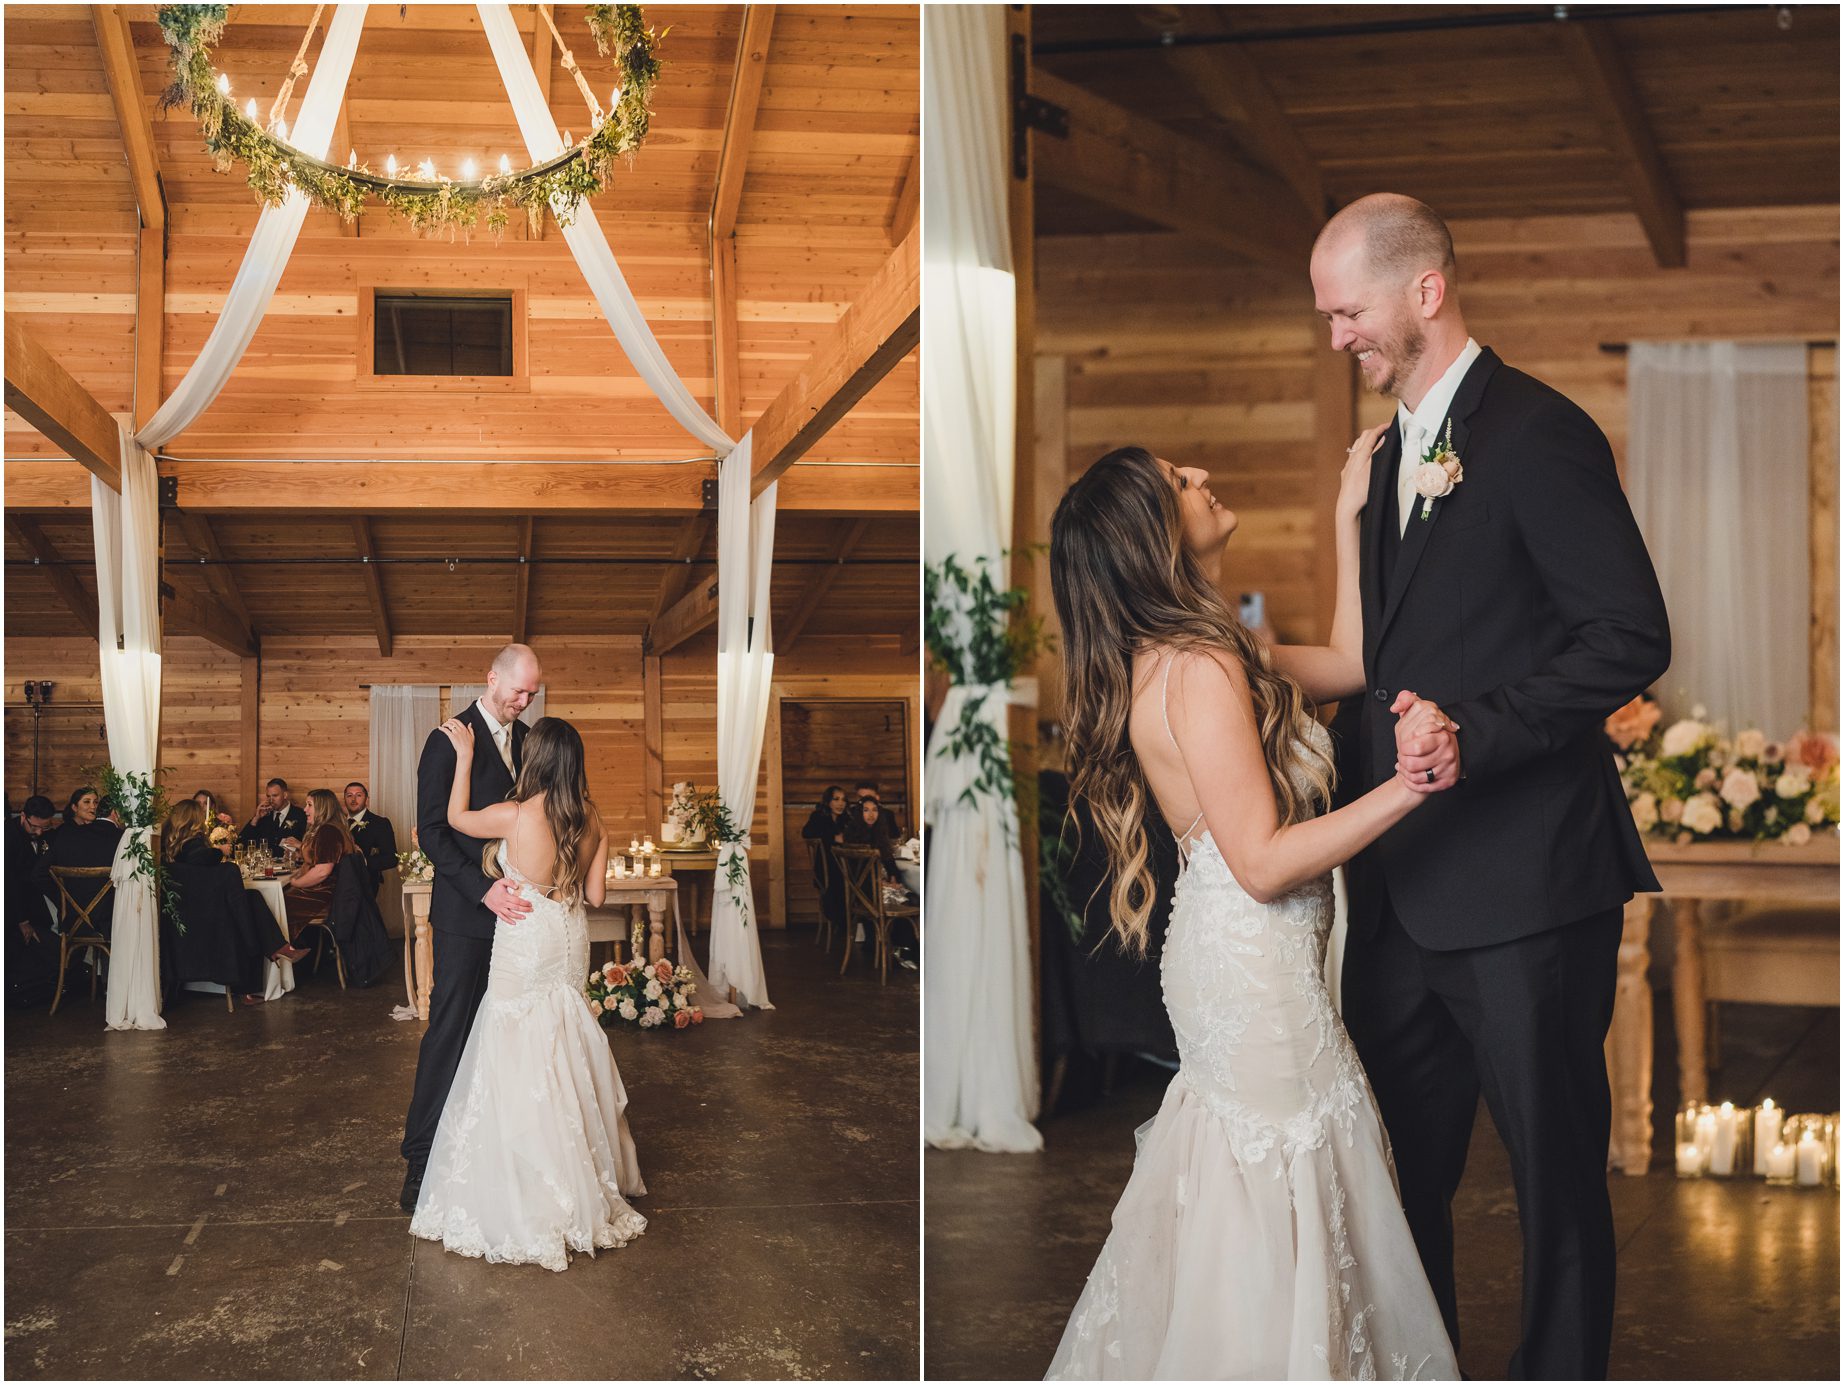 A bride and groom have their first dance at their Oak Glen wedding